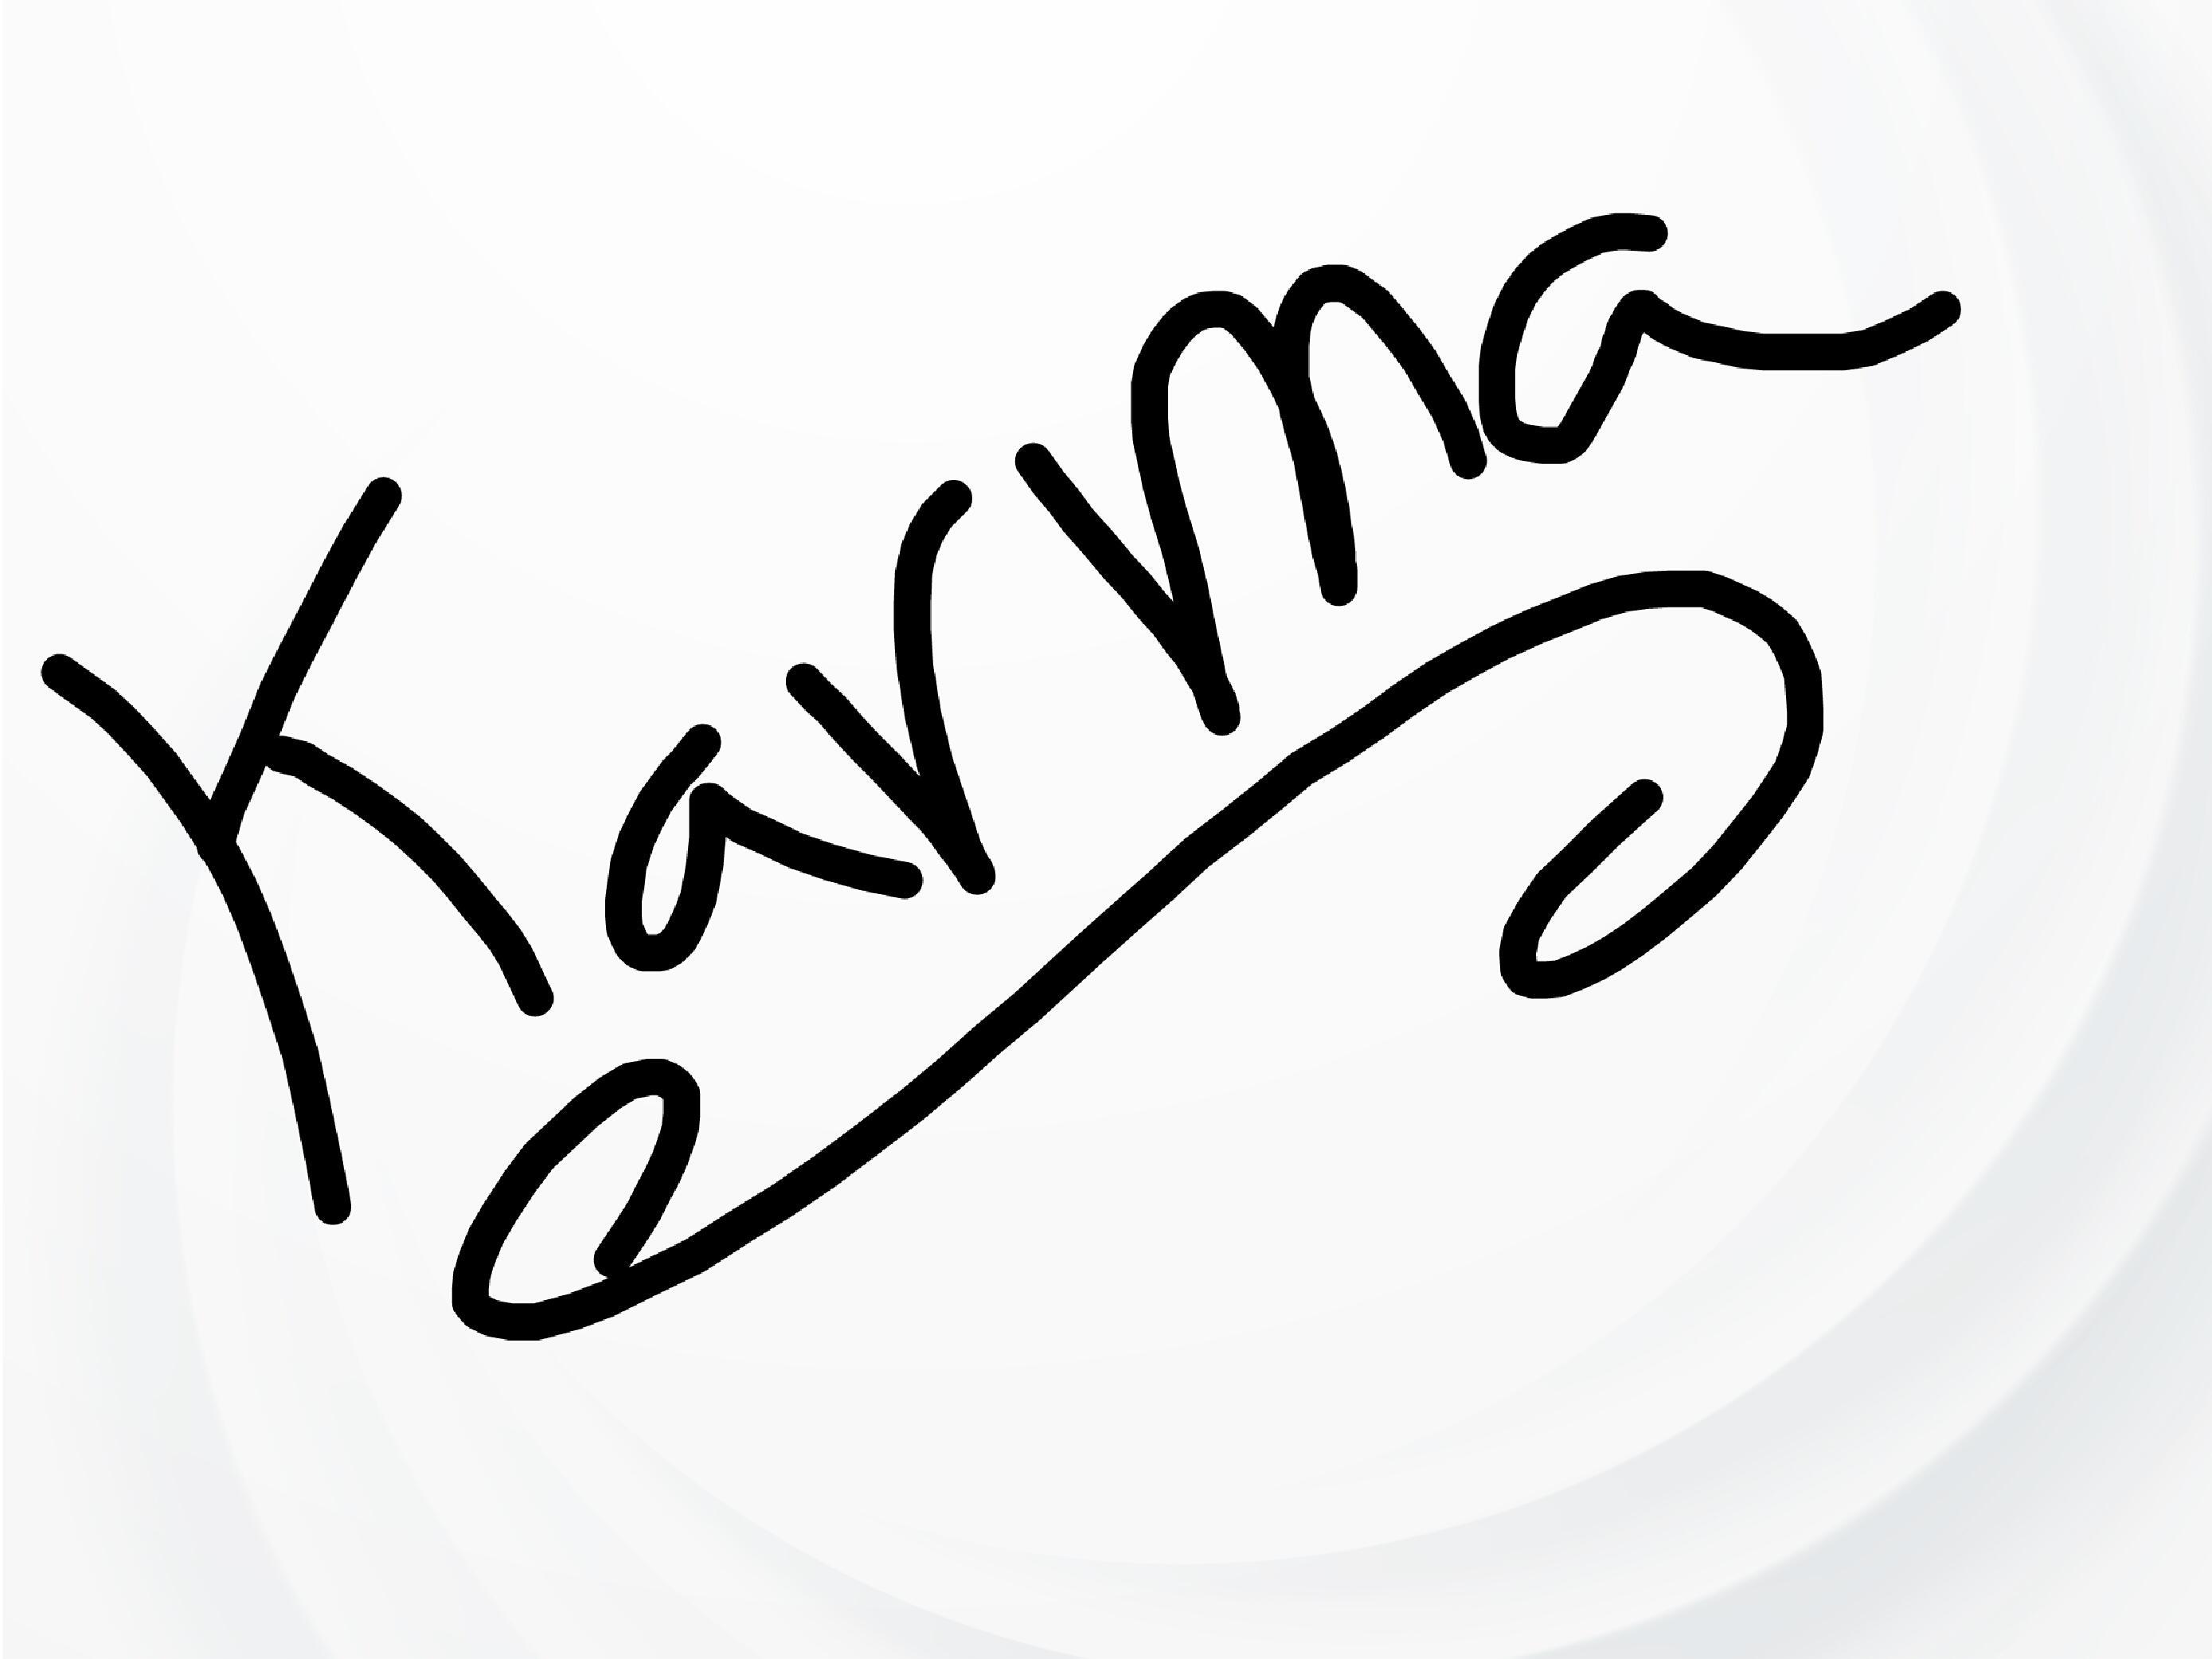 Karma Word Logo - At this point all you need is just post the word 